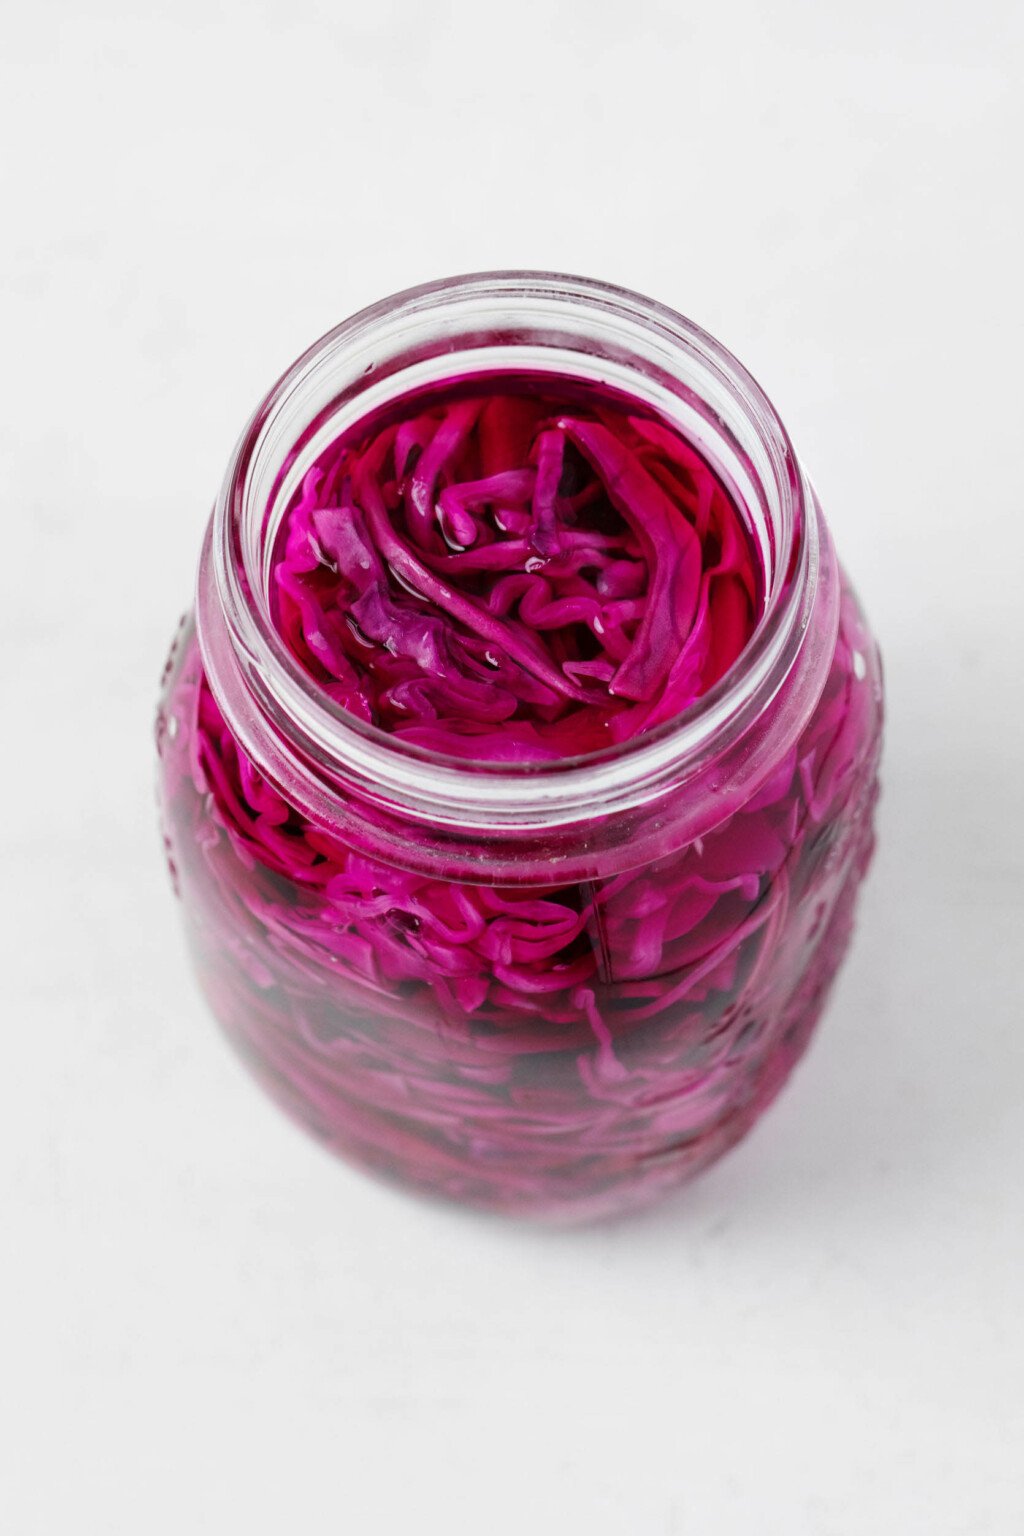 An image of a large, white mason jar, which has been filled with shredded red cabbage in a brine. It rests on a white surface.